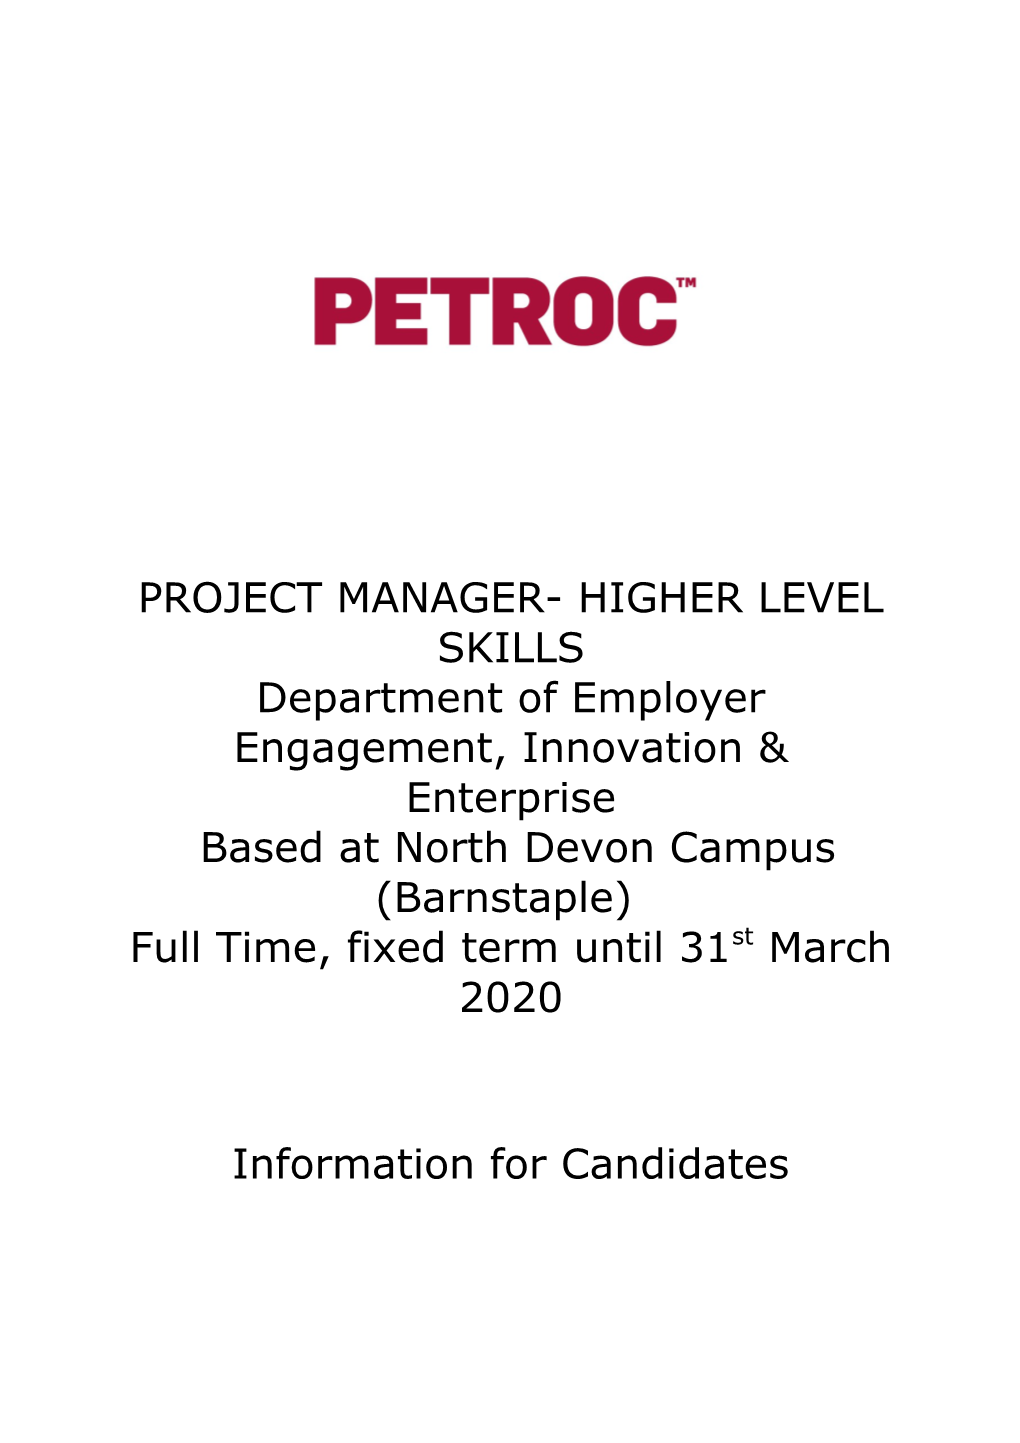 Project Manager- Higher Level Skills